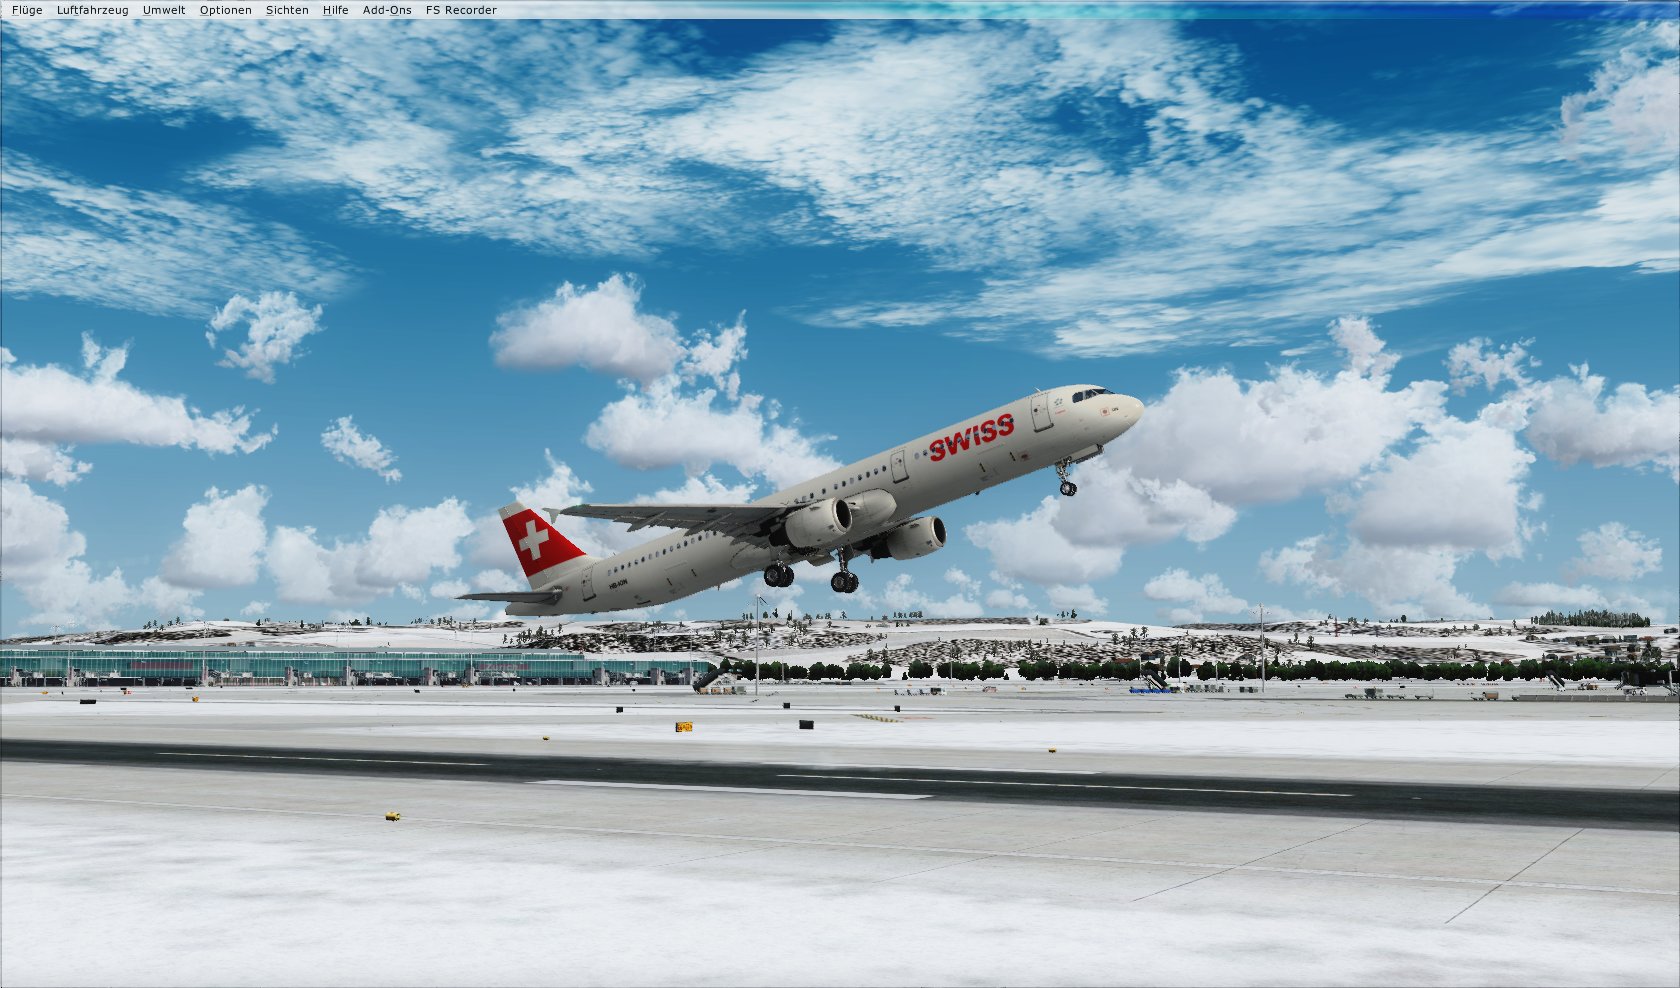 More information about "Swiss A321-200 New Colours HB-ION"